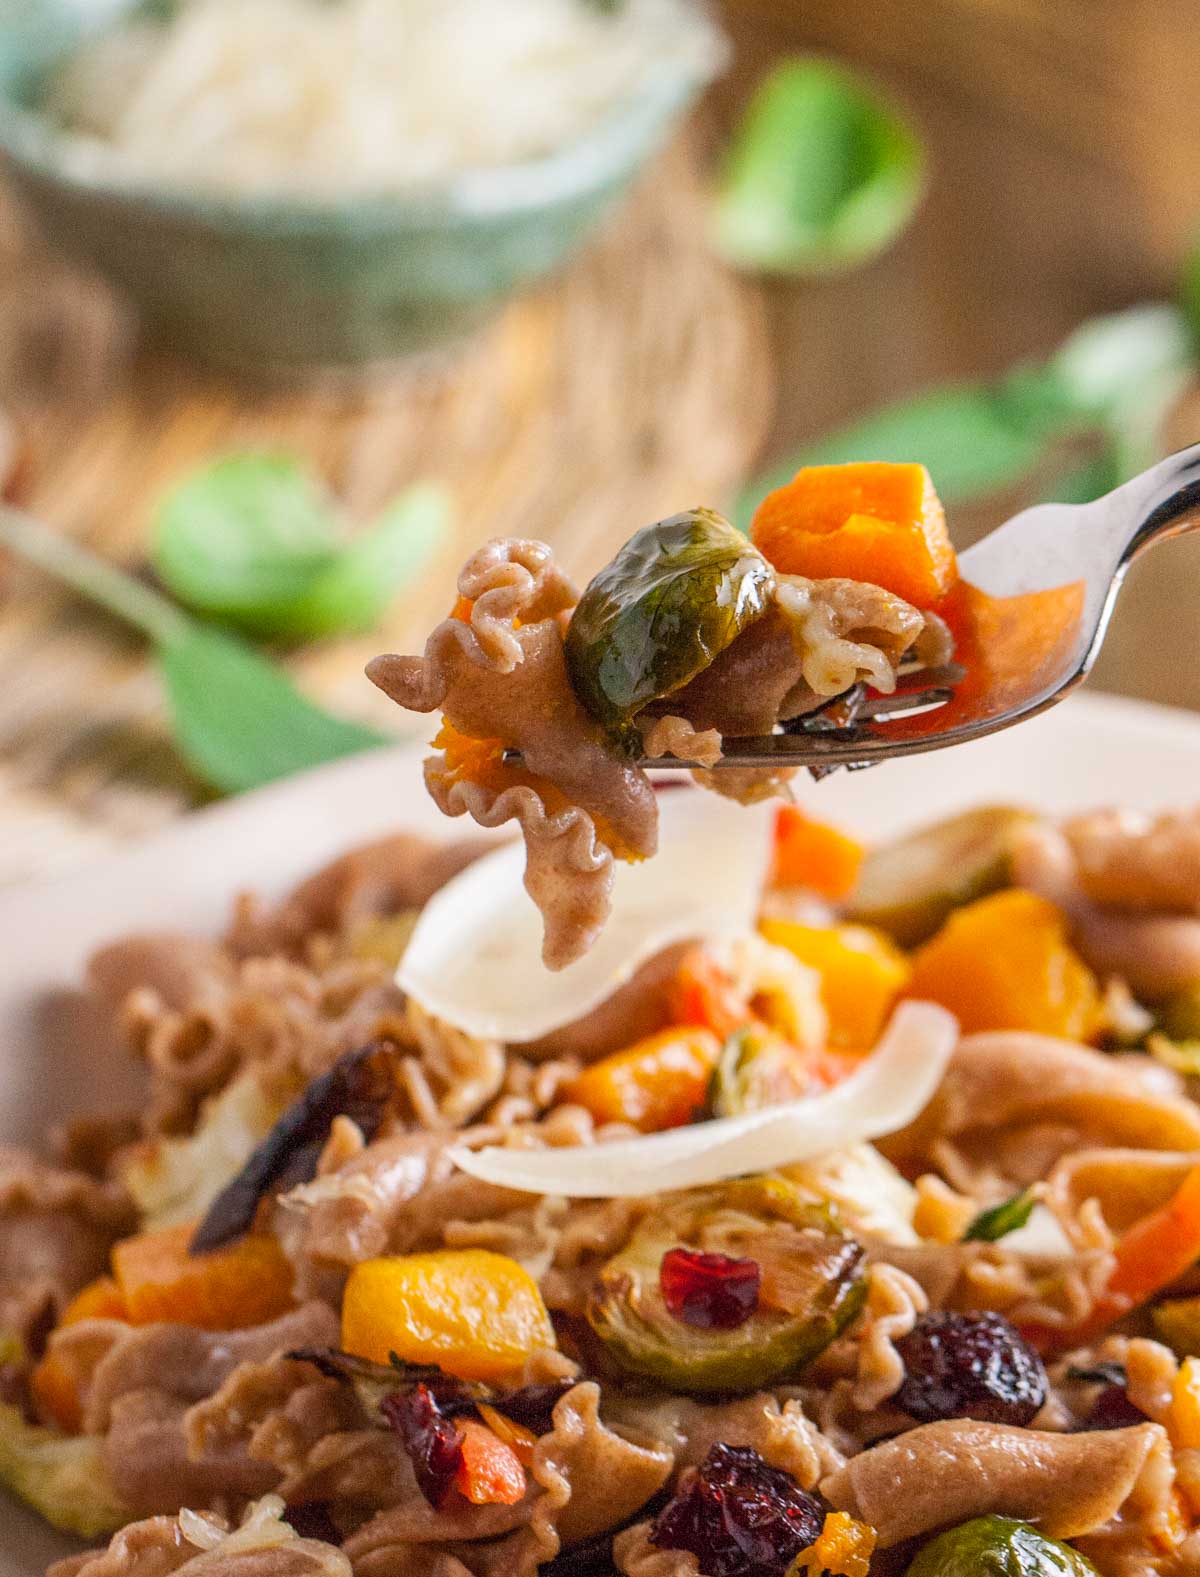 Roasted Vegetables with Sprouted Grains Pasta | WorldofPastabilities.com |Roasted Vegetables taste so delicous with our Lemon Brown Butter Sauce and Sprouted Grains Pasta!